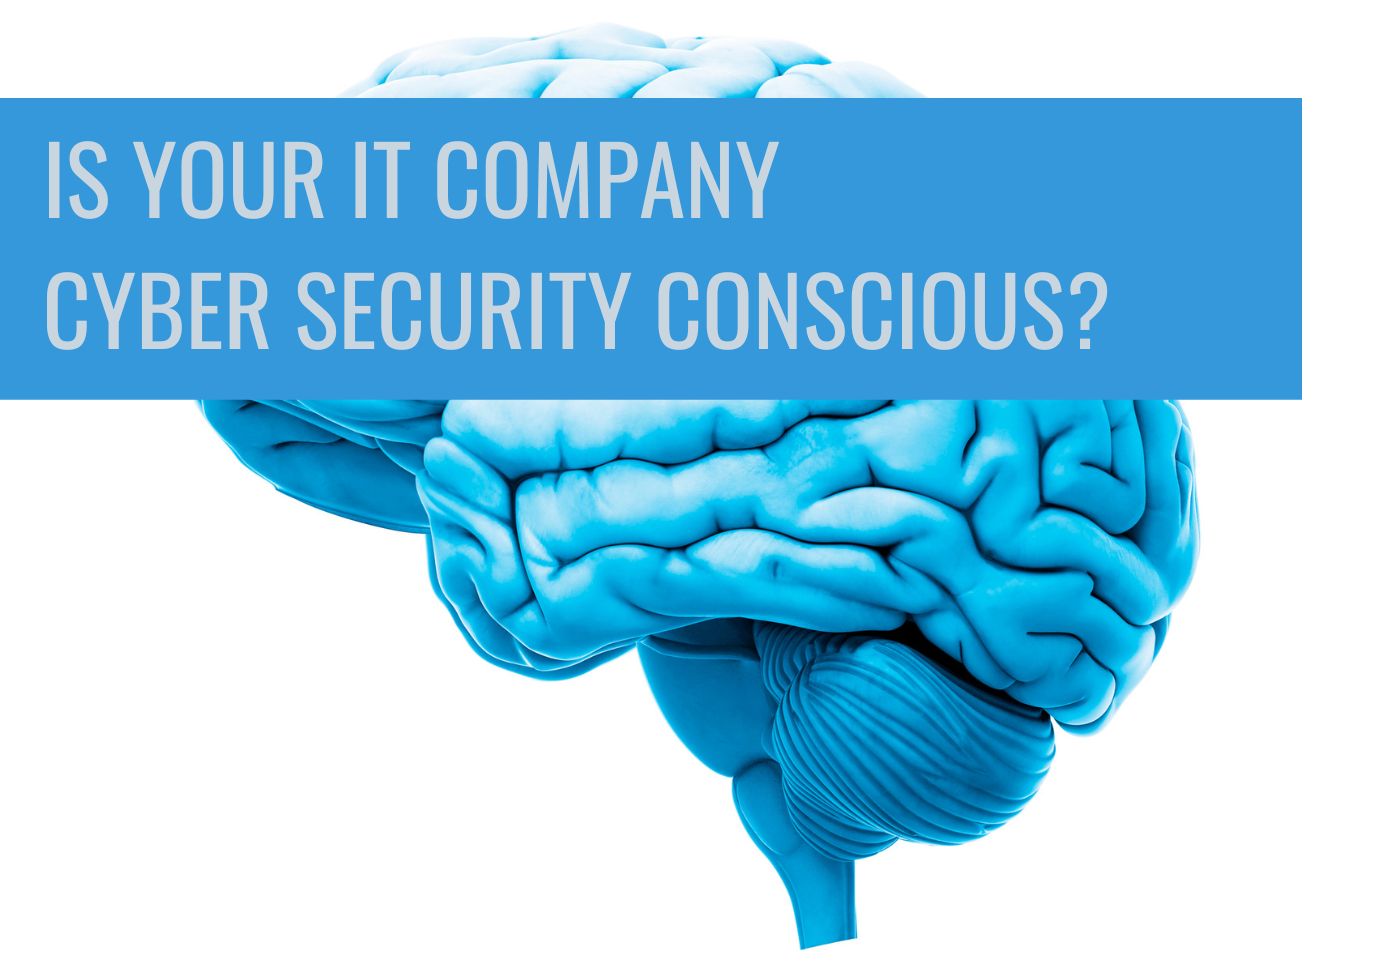 Cyber Security Conscious Company